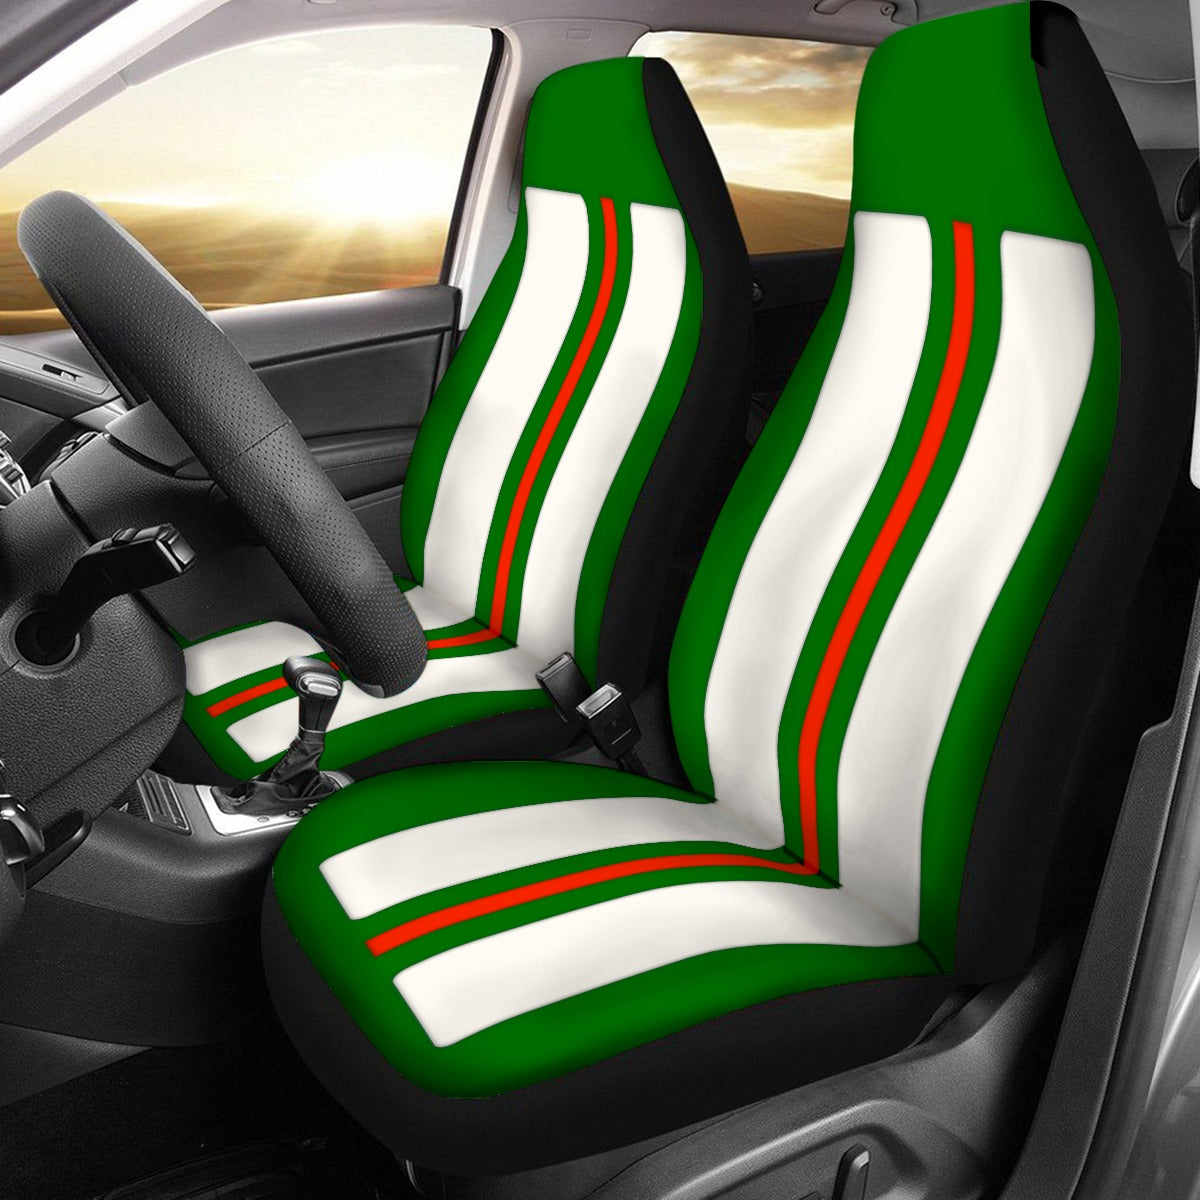 Gucci Car Seat Covers